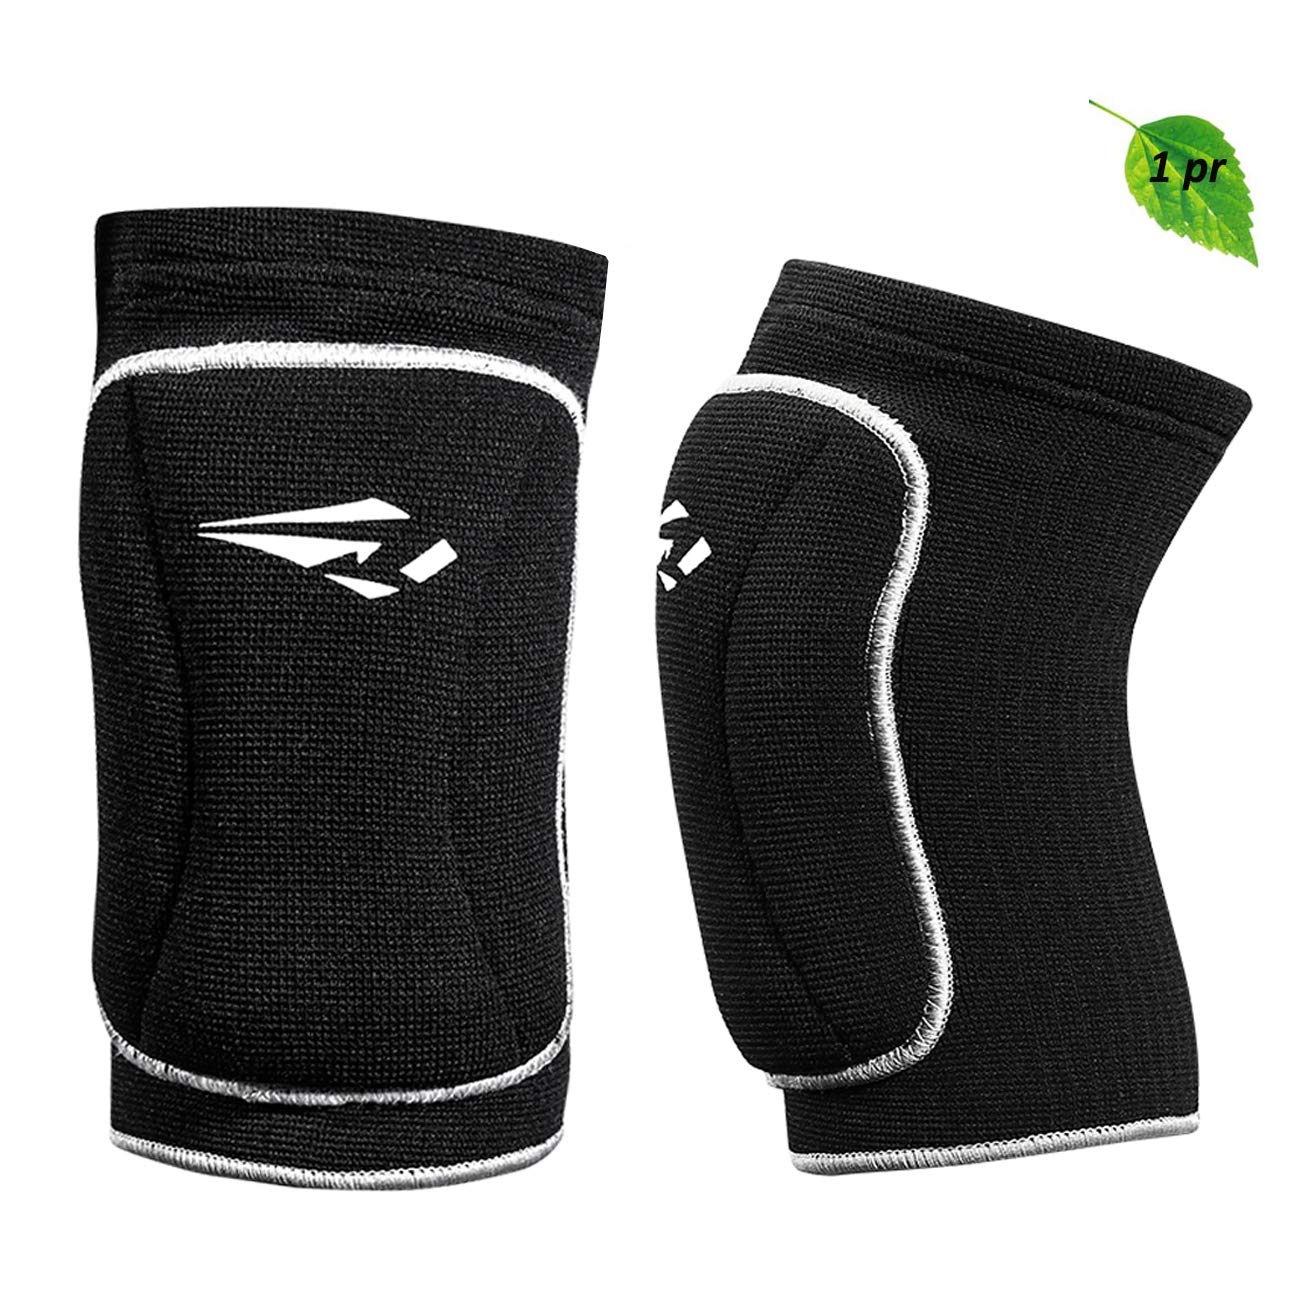 Volleyball Basketball Knee Pads Sz Med with High Shock Absorbing Cushion, Dance Riding Protector Protection for Adult Junior Youth Men Women Boy Girls (black, Middle) - Opticdeals